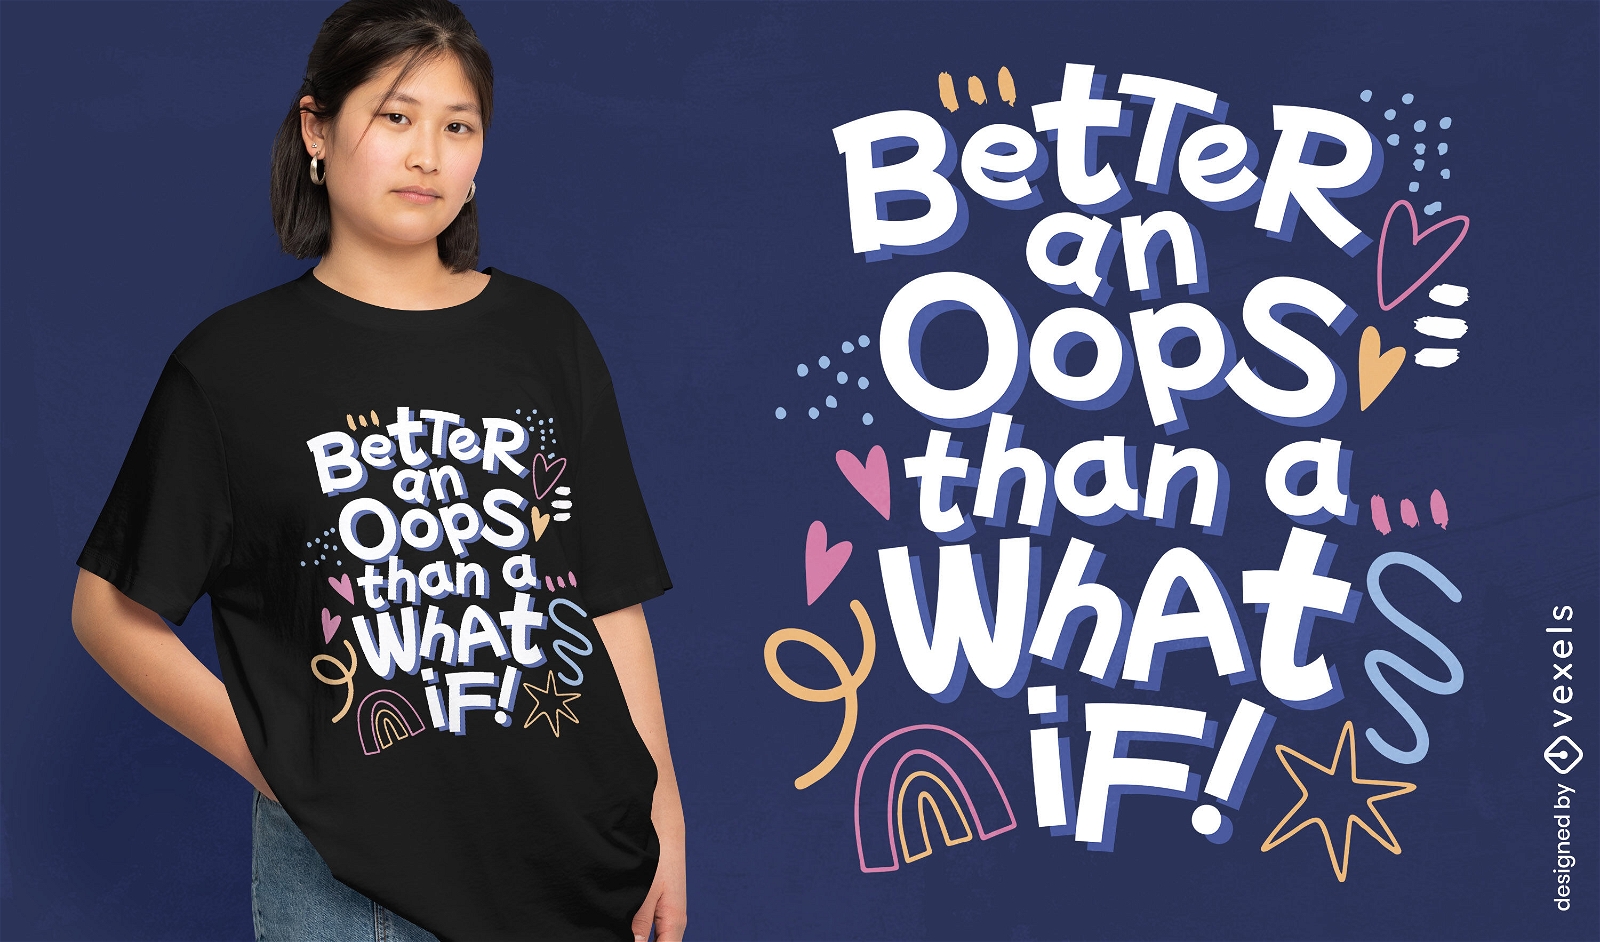 Funny motivational quote t-shirt design